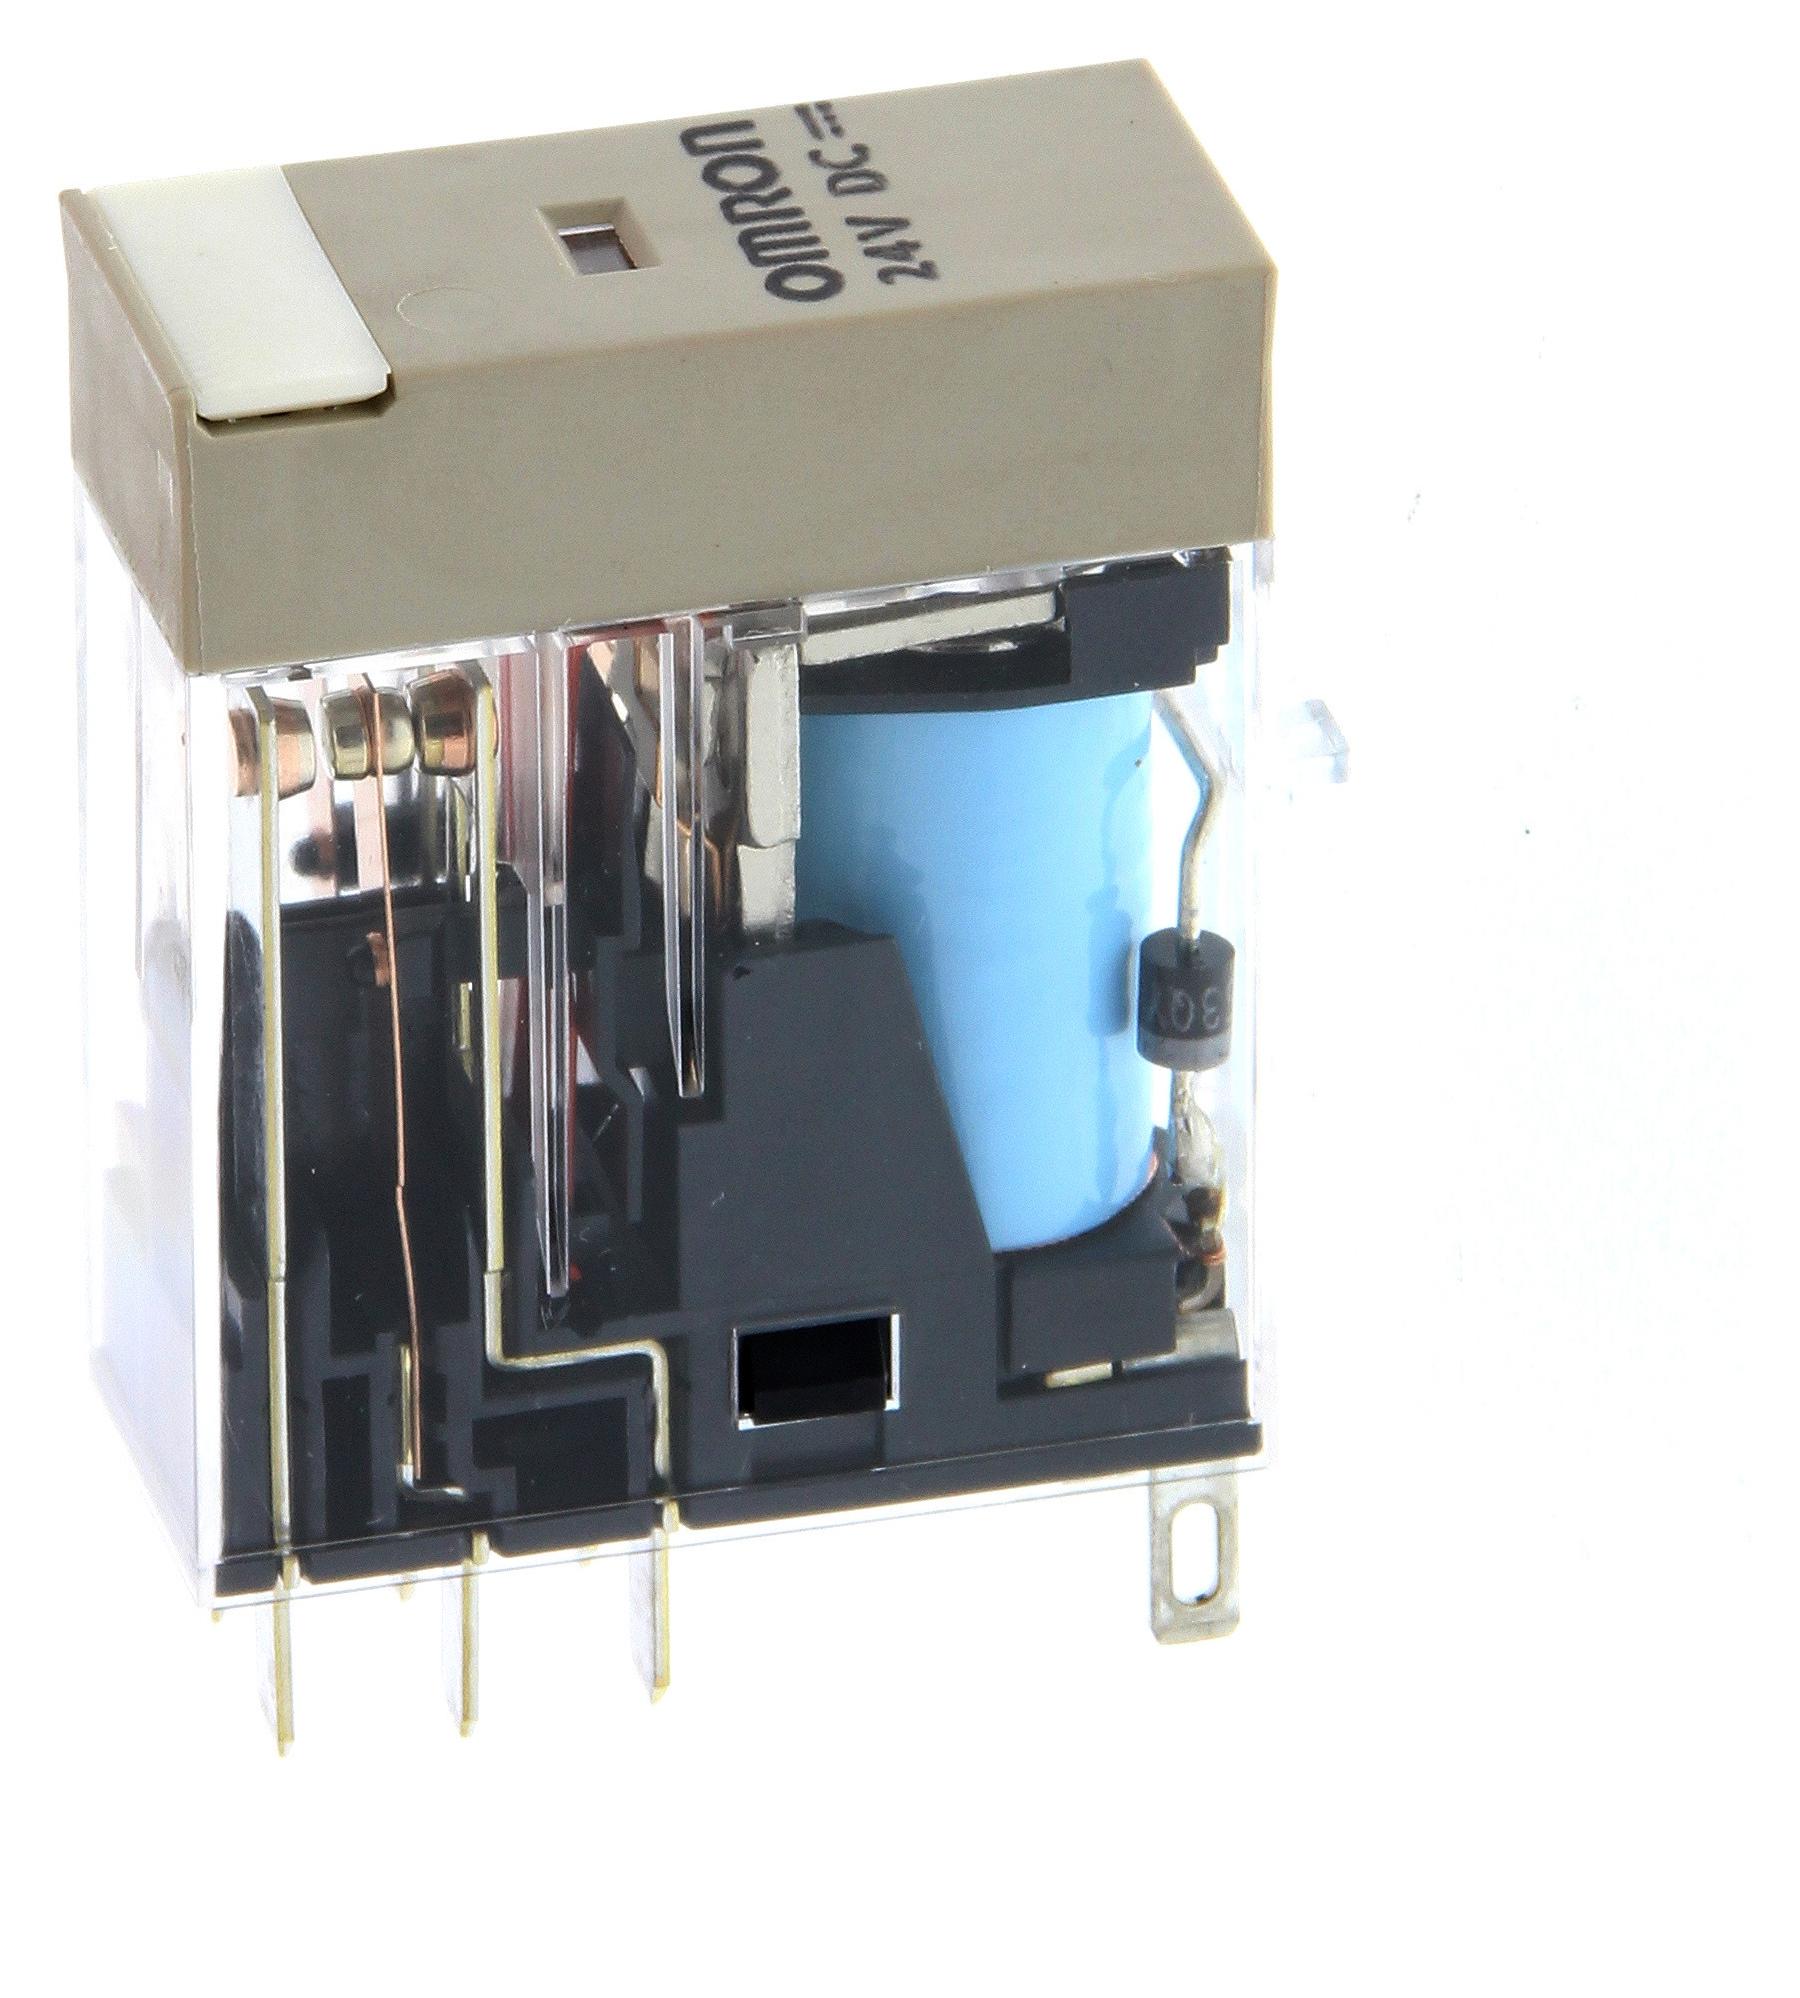 G2R-2-SD 24VDC (S) POWER - GENERAL PURPOSE RELAYS OMRON